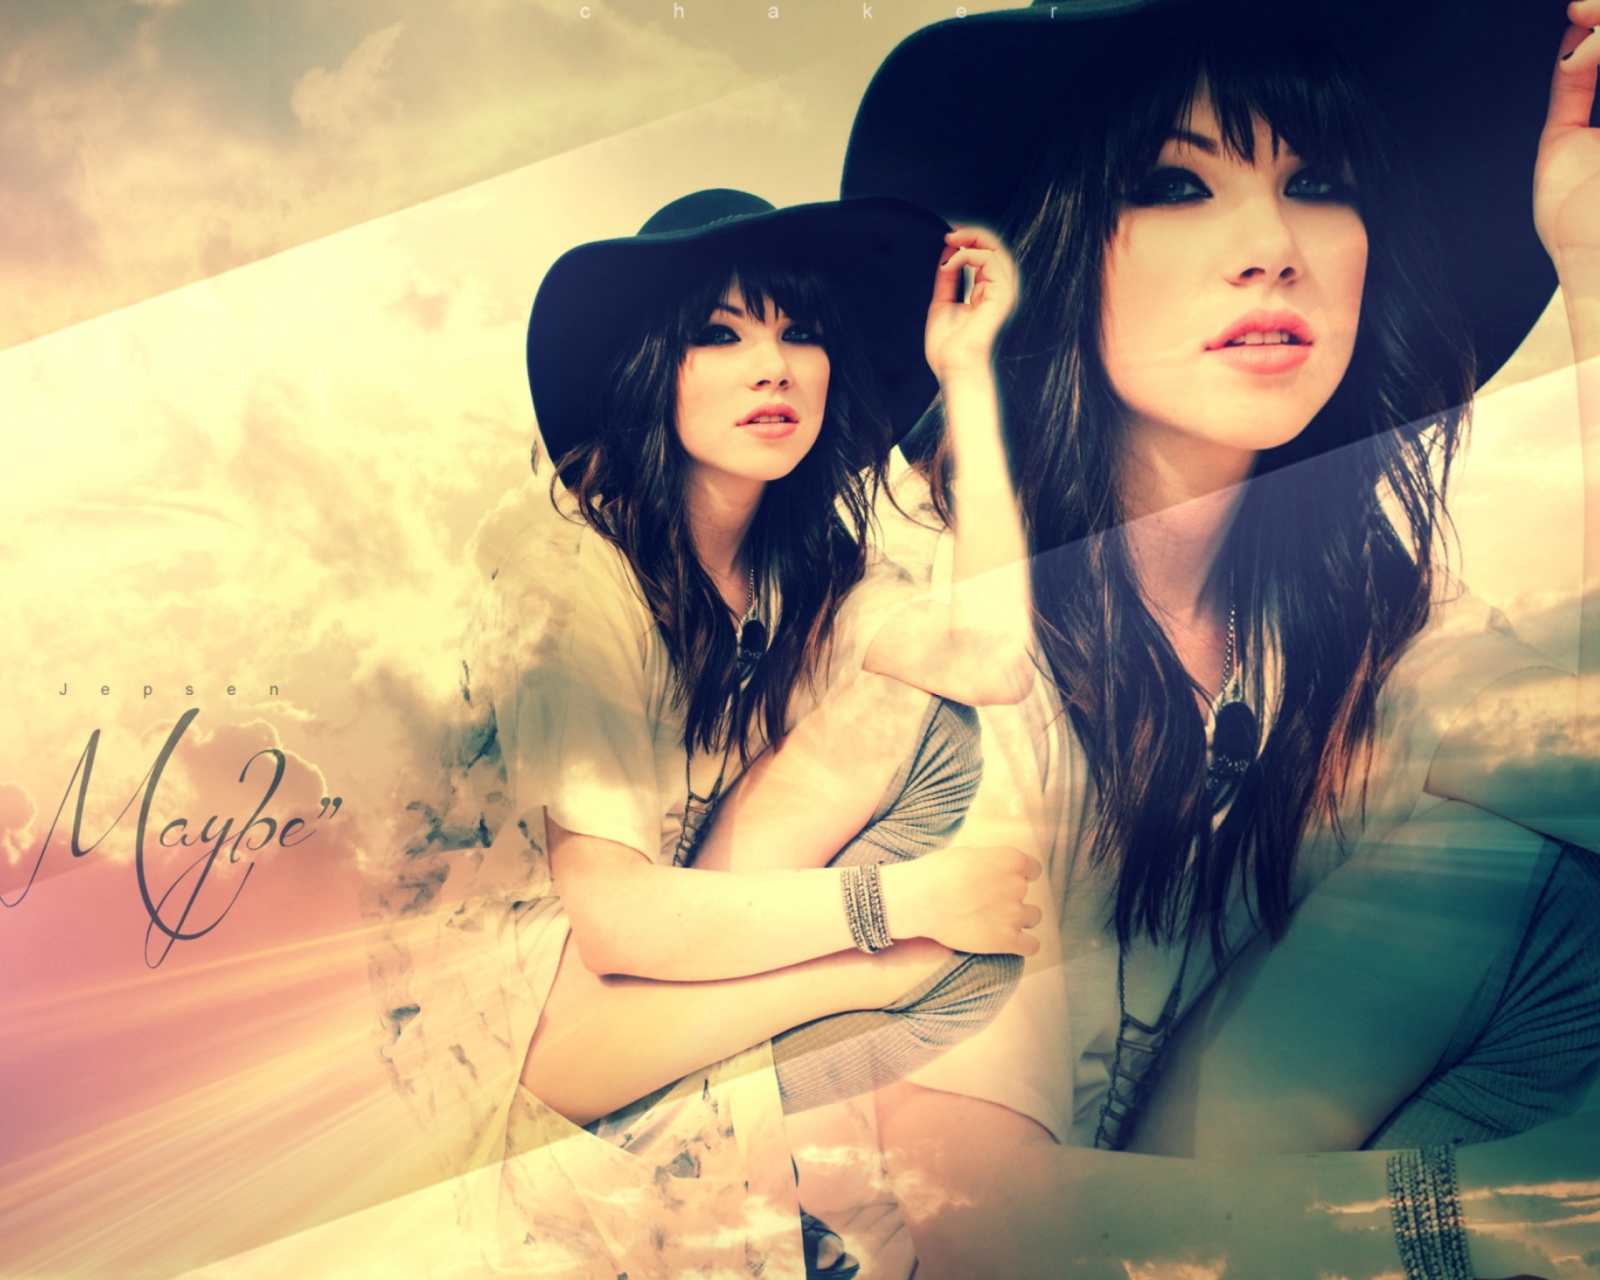 Carly Rae Jepsen - Call Me Maybe wallpaper 1600x1280